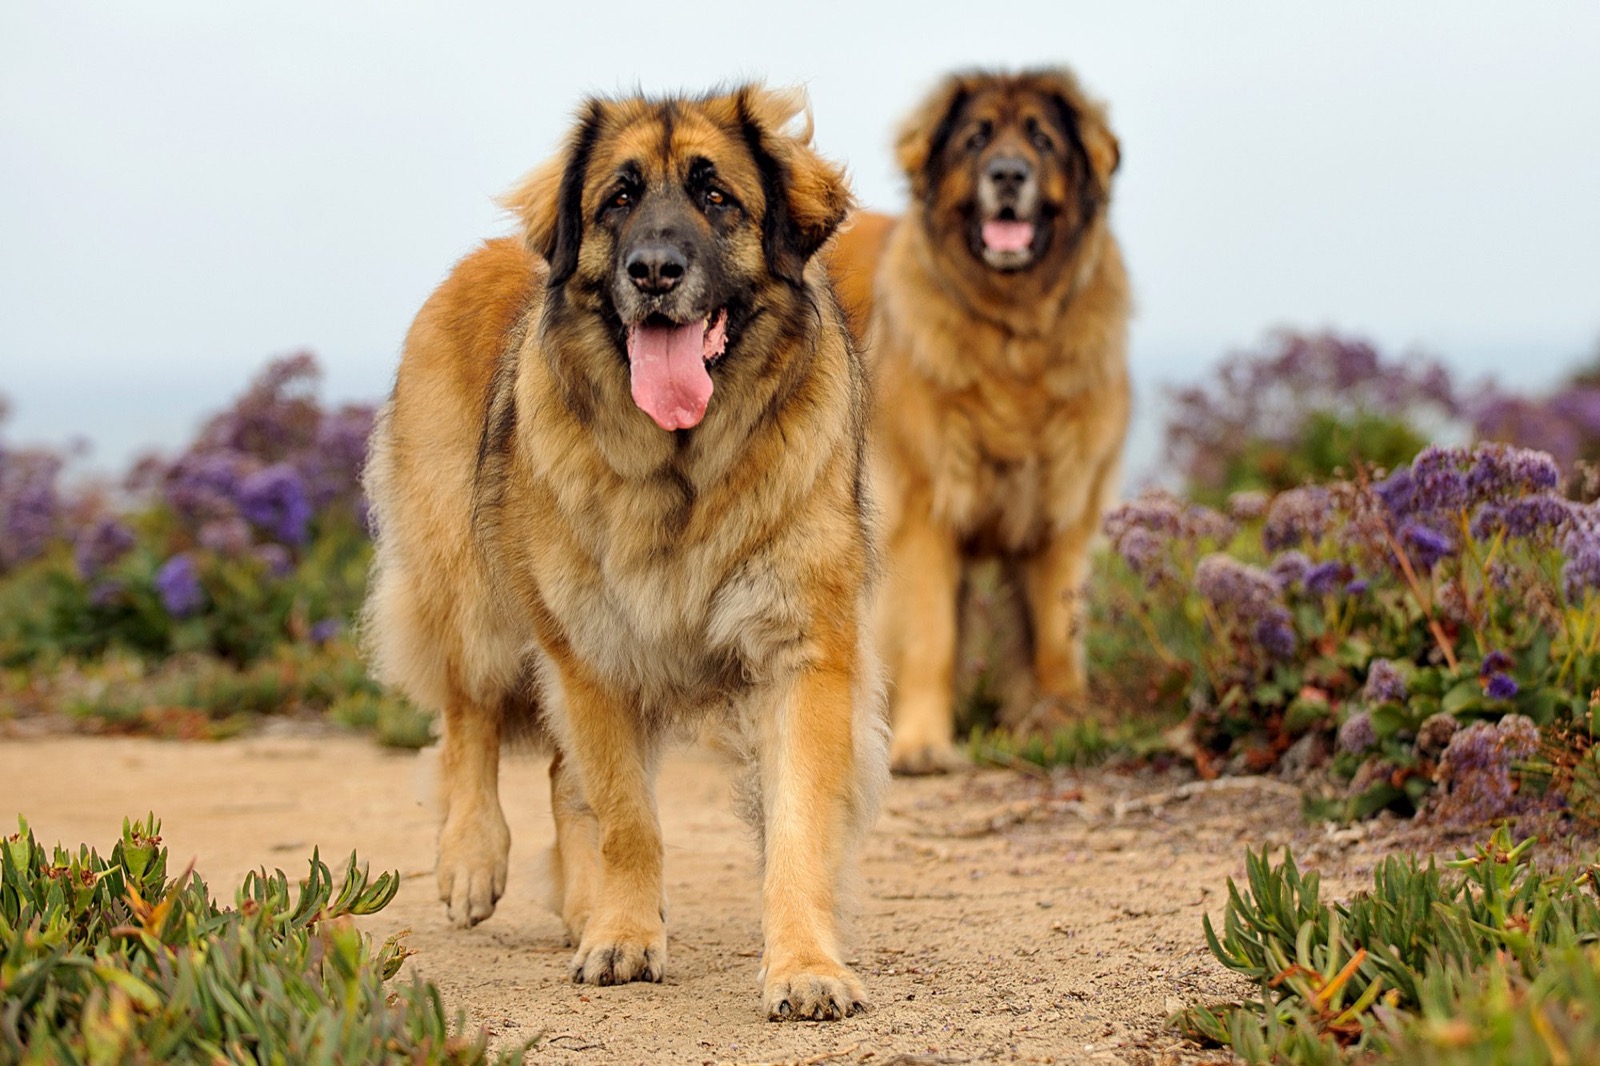 If You Want to Know the Number of 👶🏻 Kids You’ll Have, Choose Some 🐶 Dogs to Find Out Leonberger